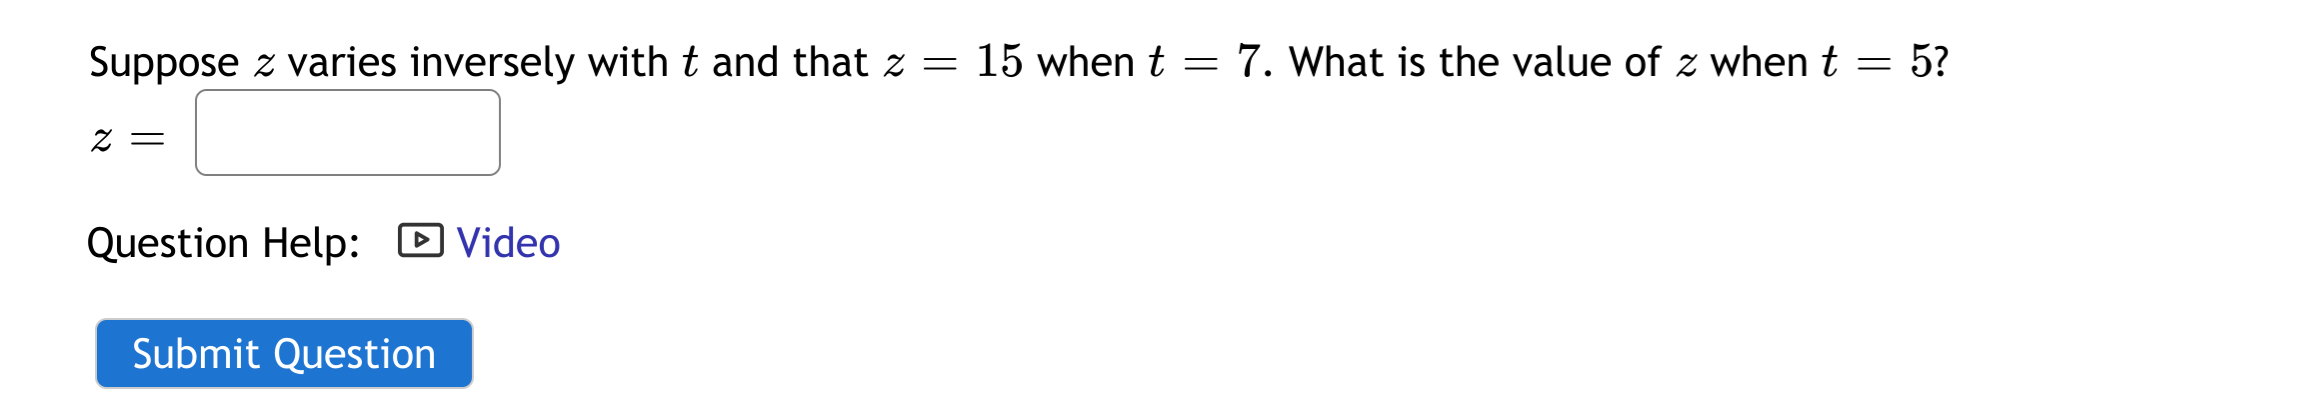 Suppose z varies inversely with t and that z = 15 when t = 7. What is the value of z when t = 5?
Question Help: D Video
Submit Question
